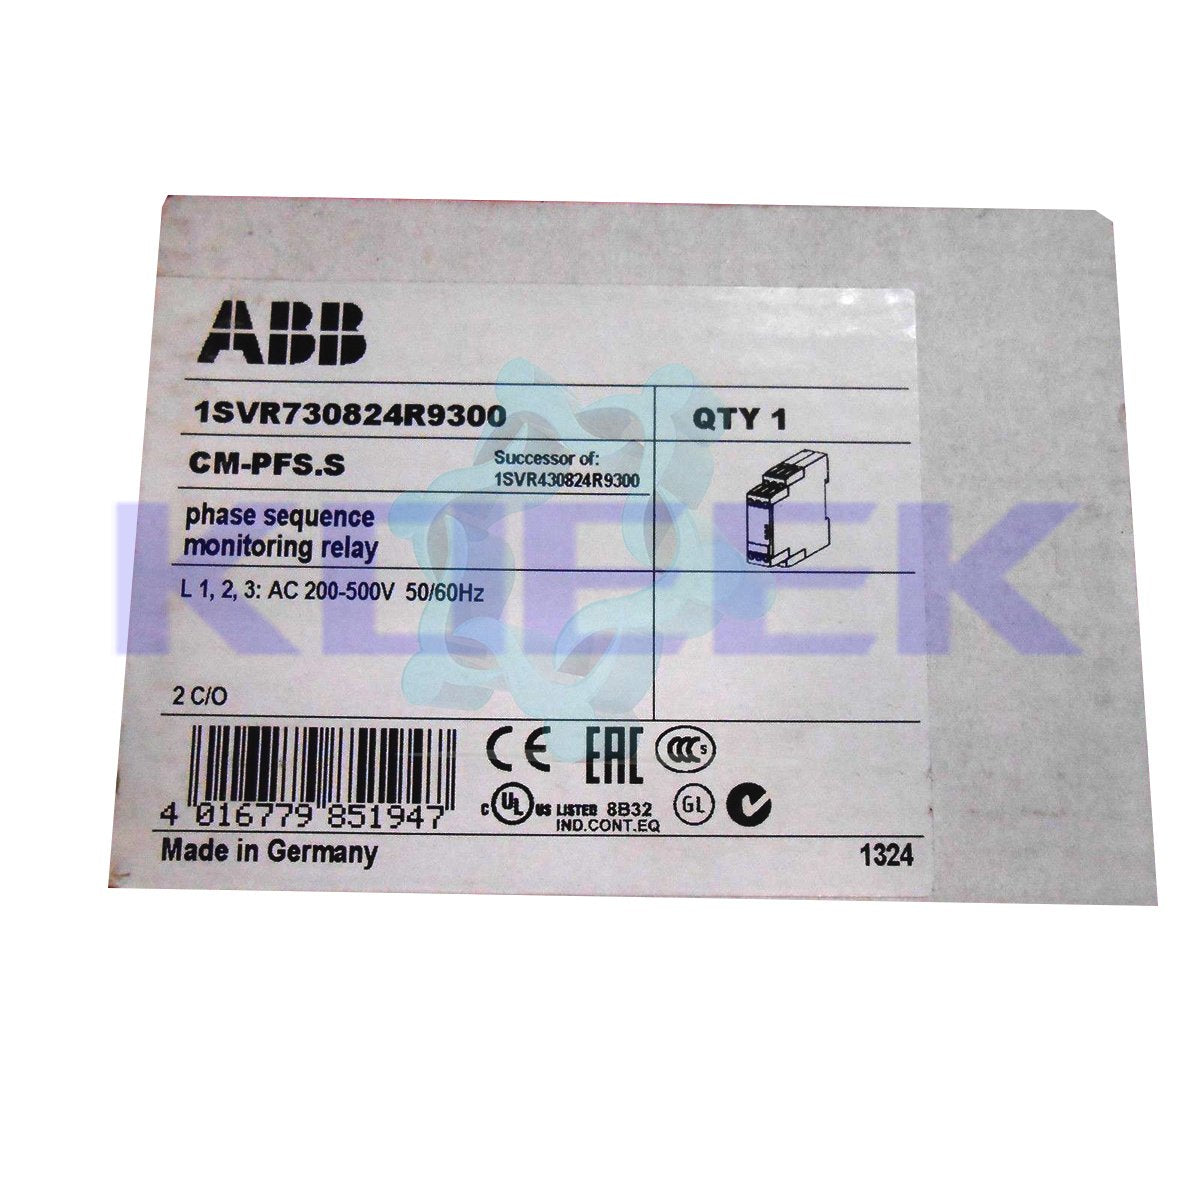 CM-PFS.S KOEED 101-200, ABB, import_2020_10_10_031751, NEW, Other